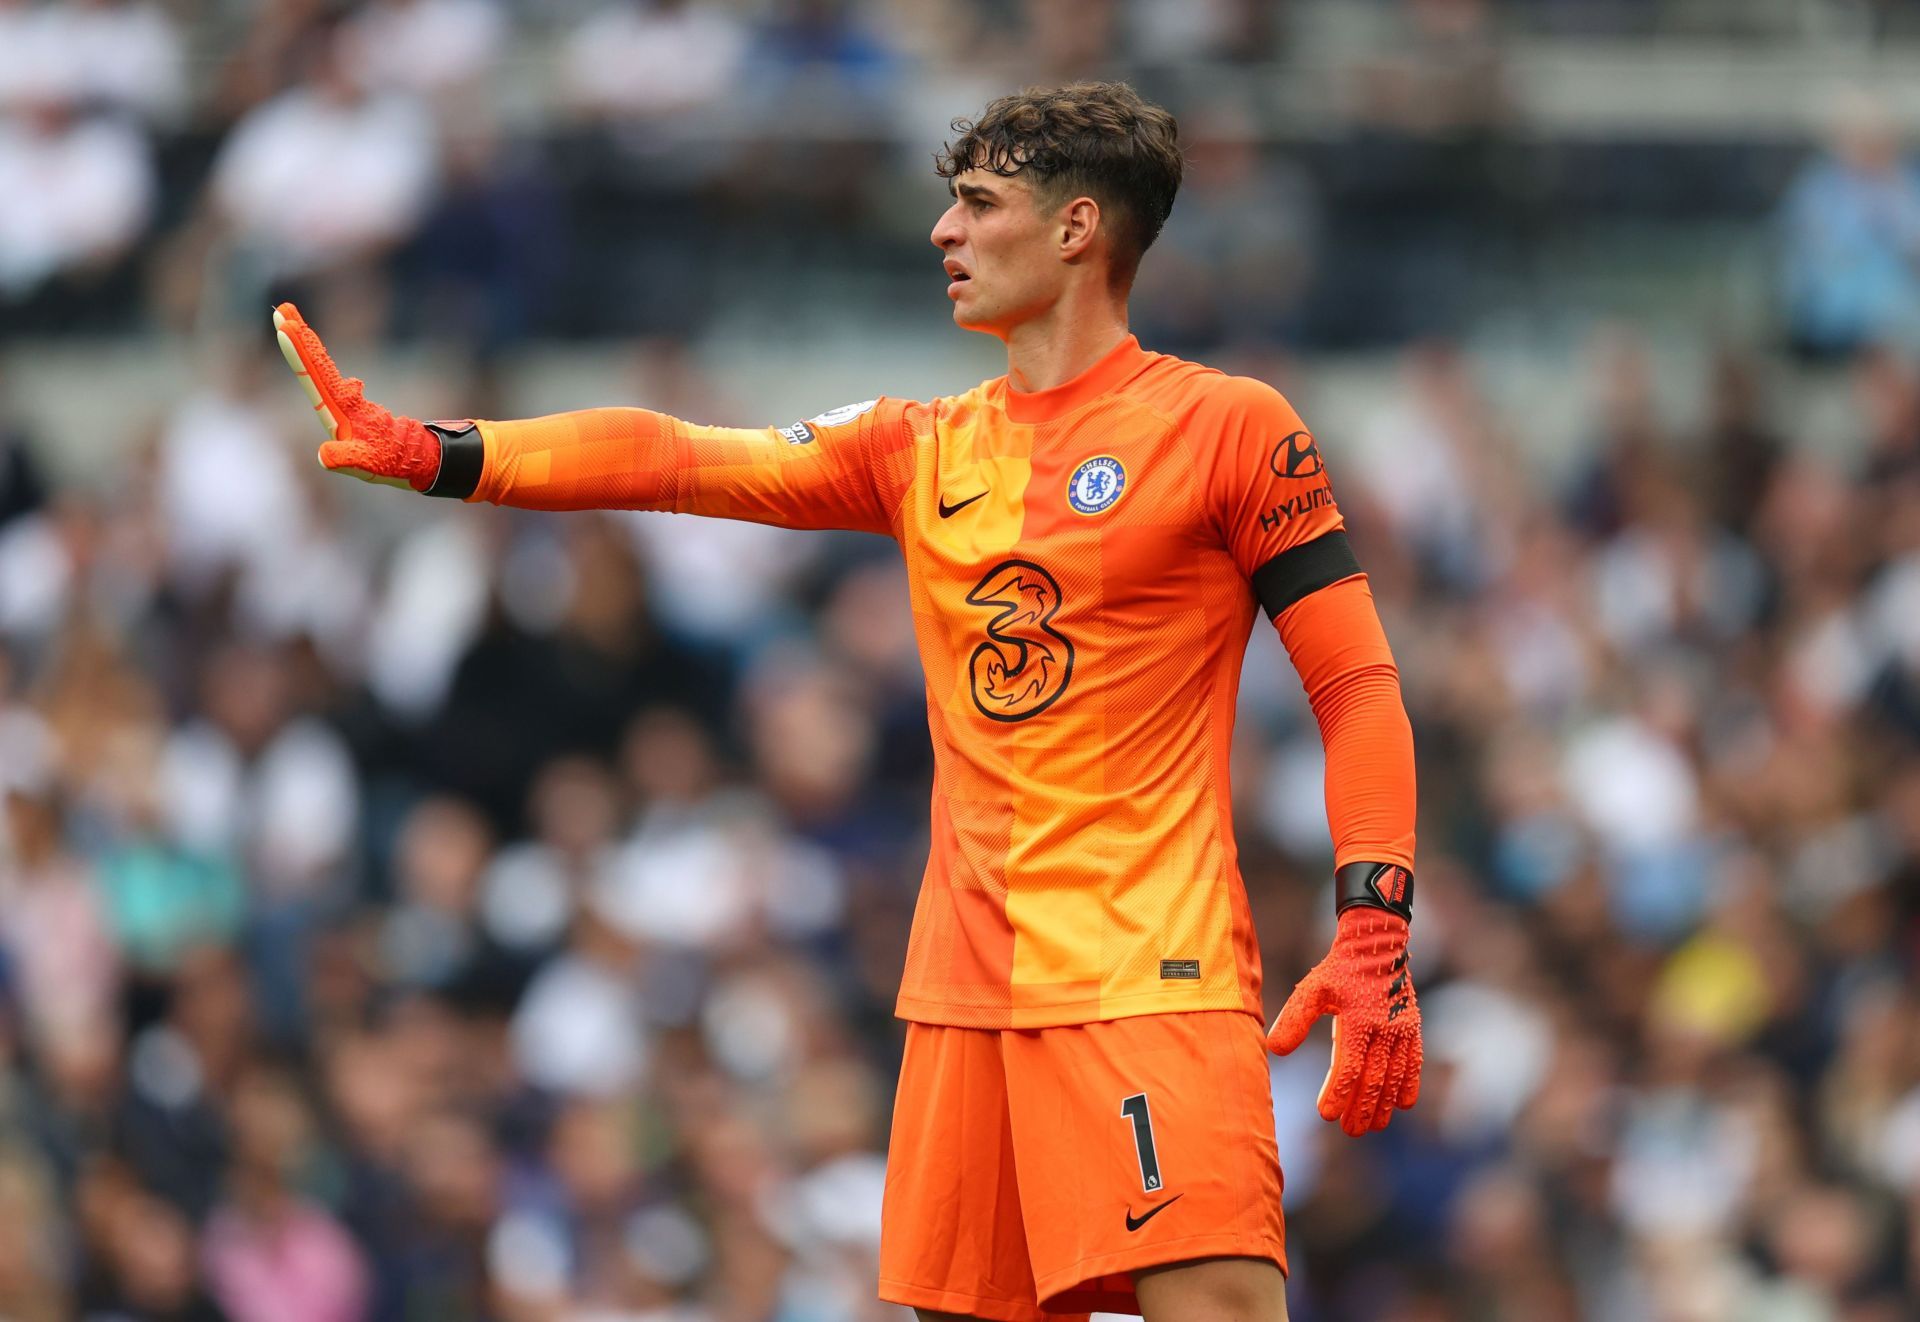 Kepa will be looking to put in some good performances in the coming matches